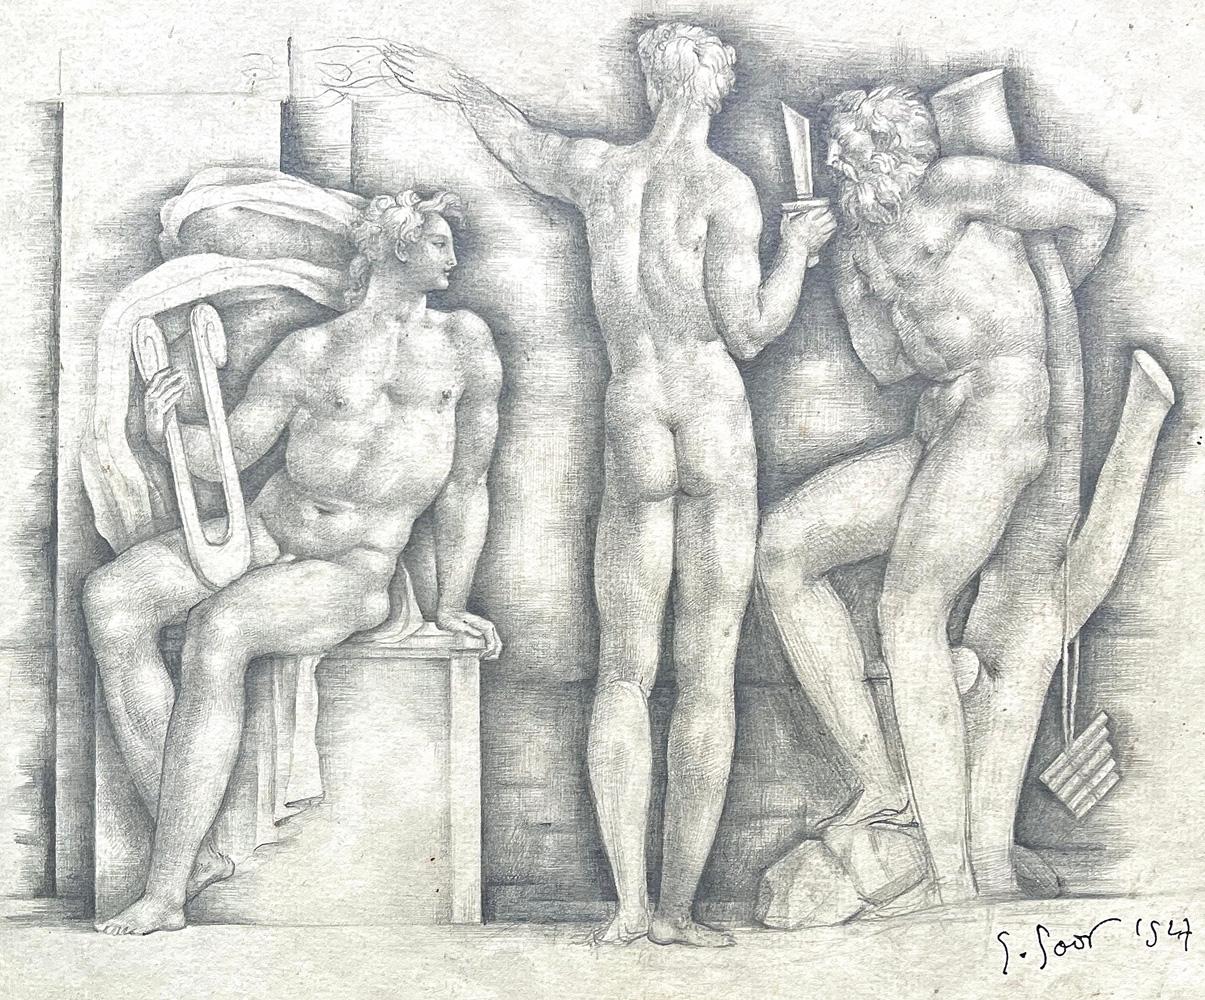 Superbly conceived and executed by Gaston Goor in the late 1940s, when he was at the height of his powers, this drawing brings together three male figures -- all beautifully depicted in the nude -- Apollo, Hyancinthus and Cyparissus. Apollo is shown